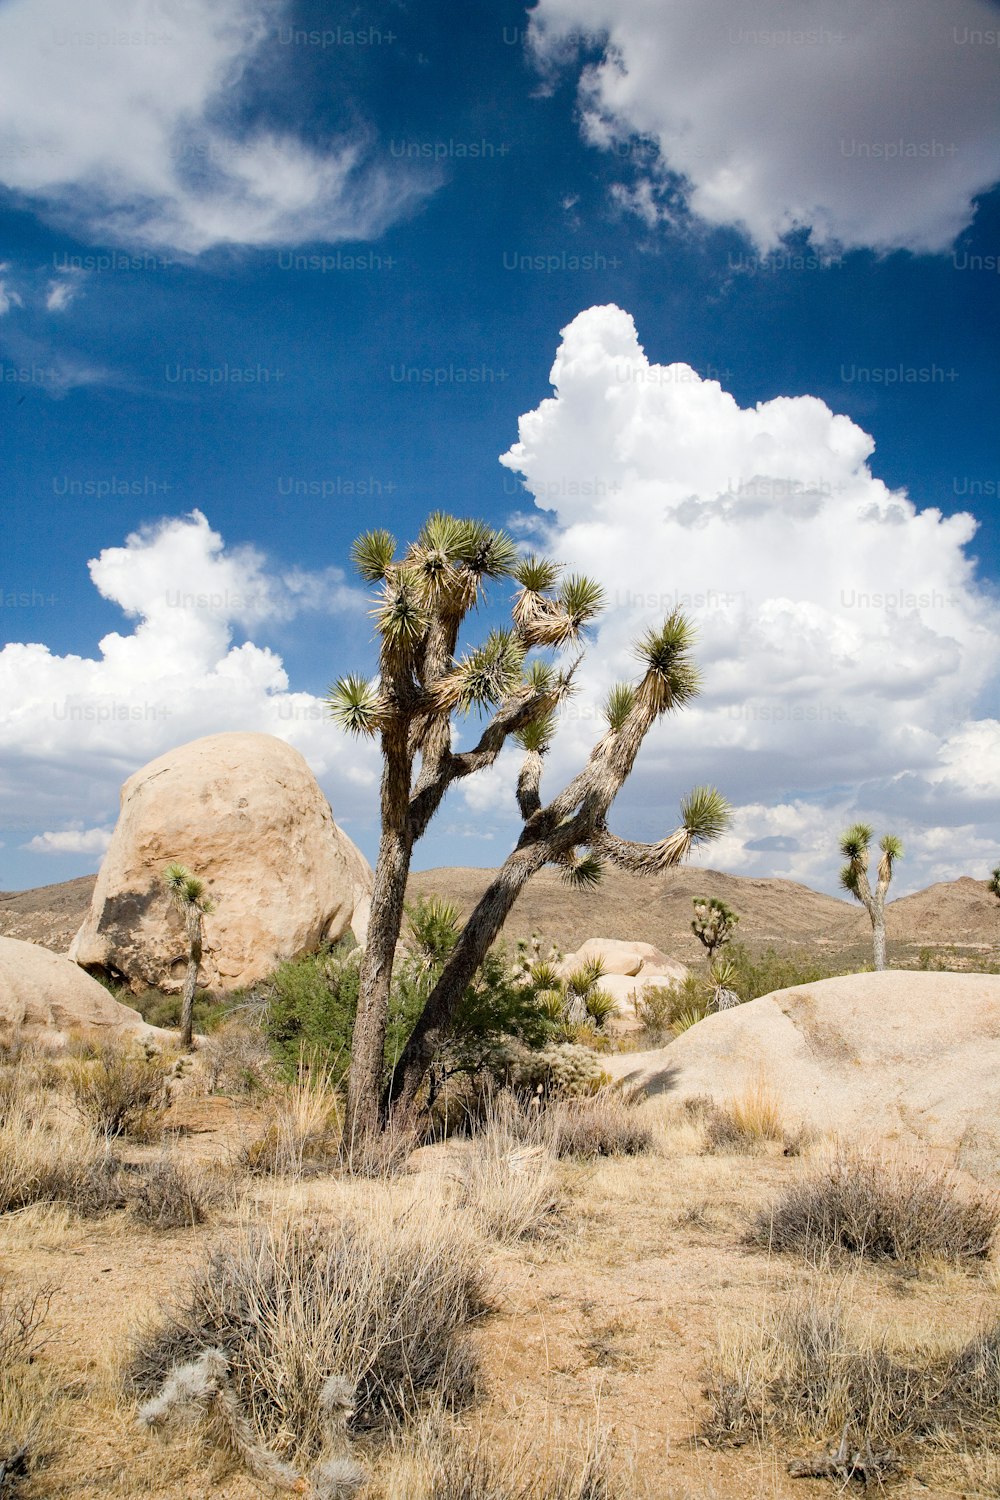 a joshua tree in the middle of a desert